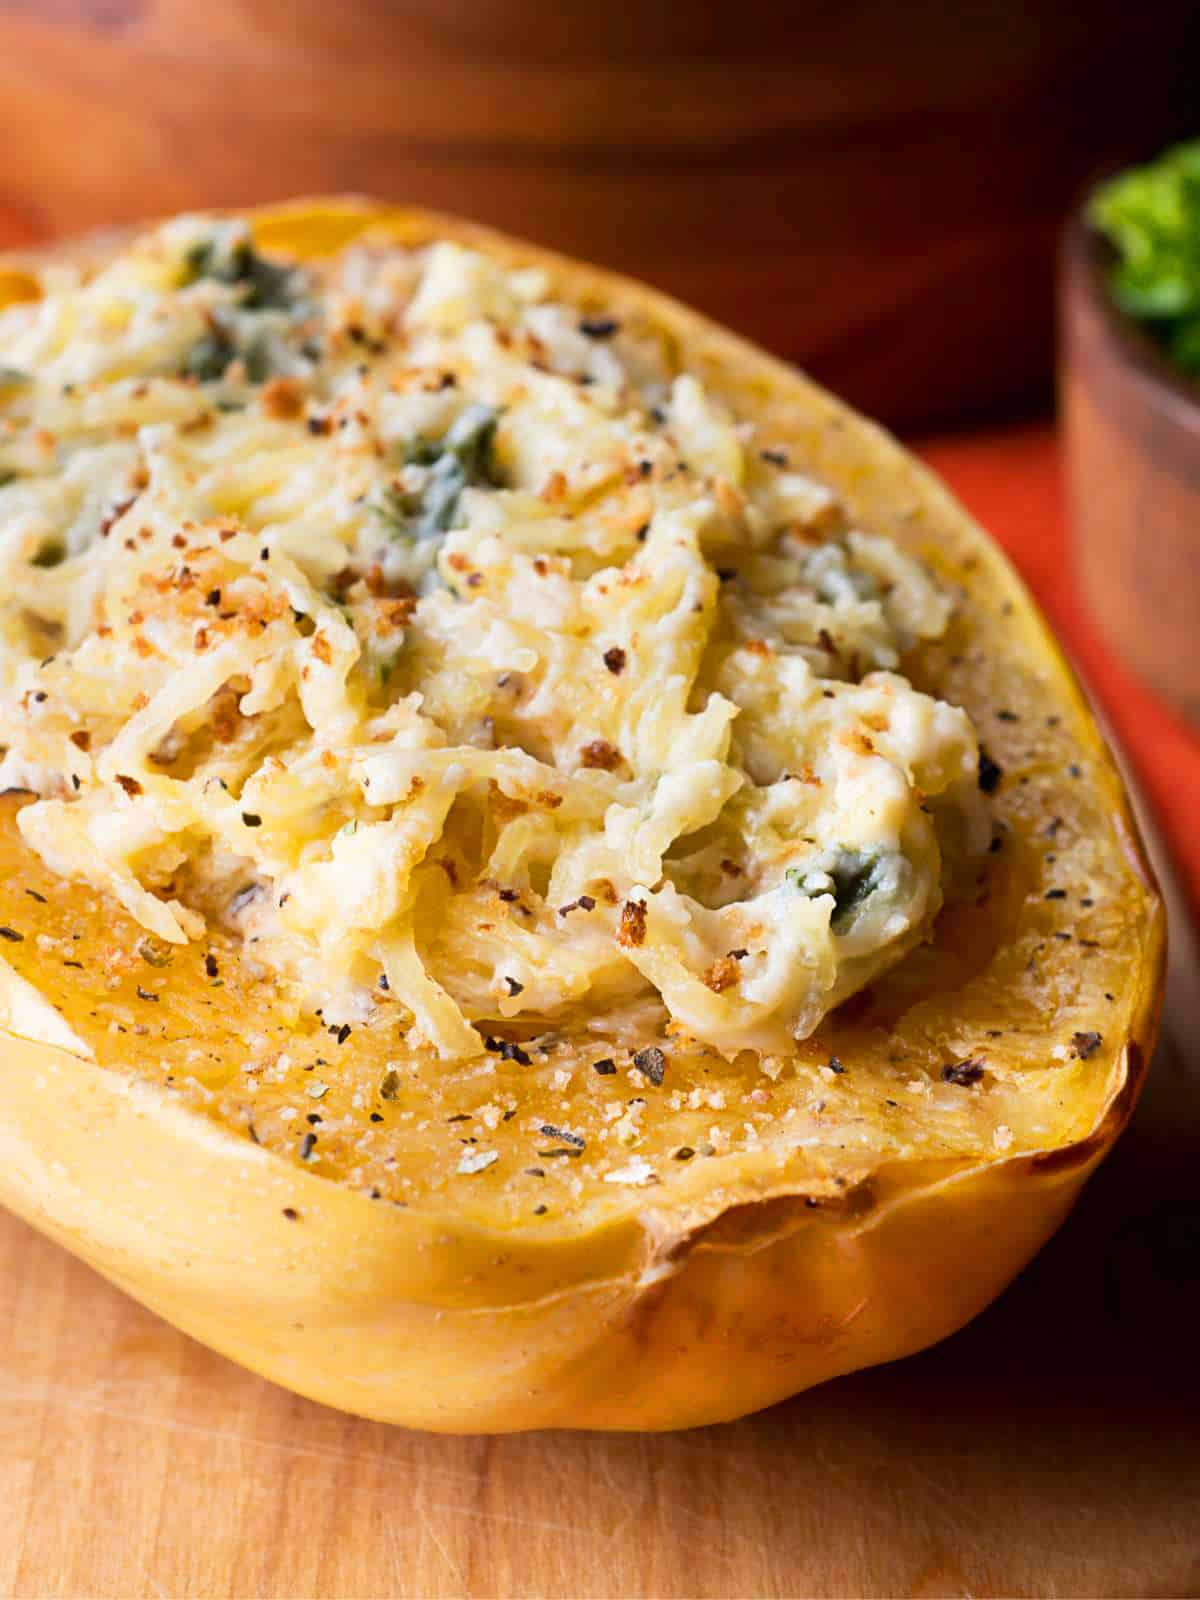 Spaghetti squash half topped with creamy sauces and herbs.